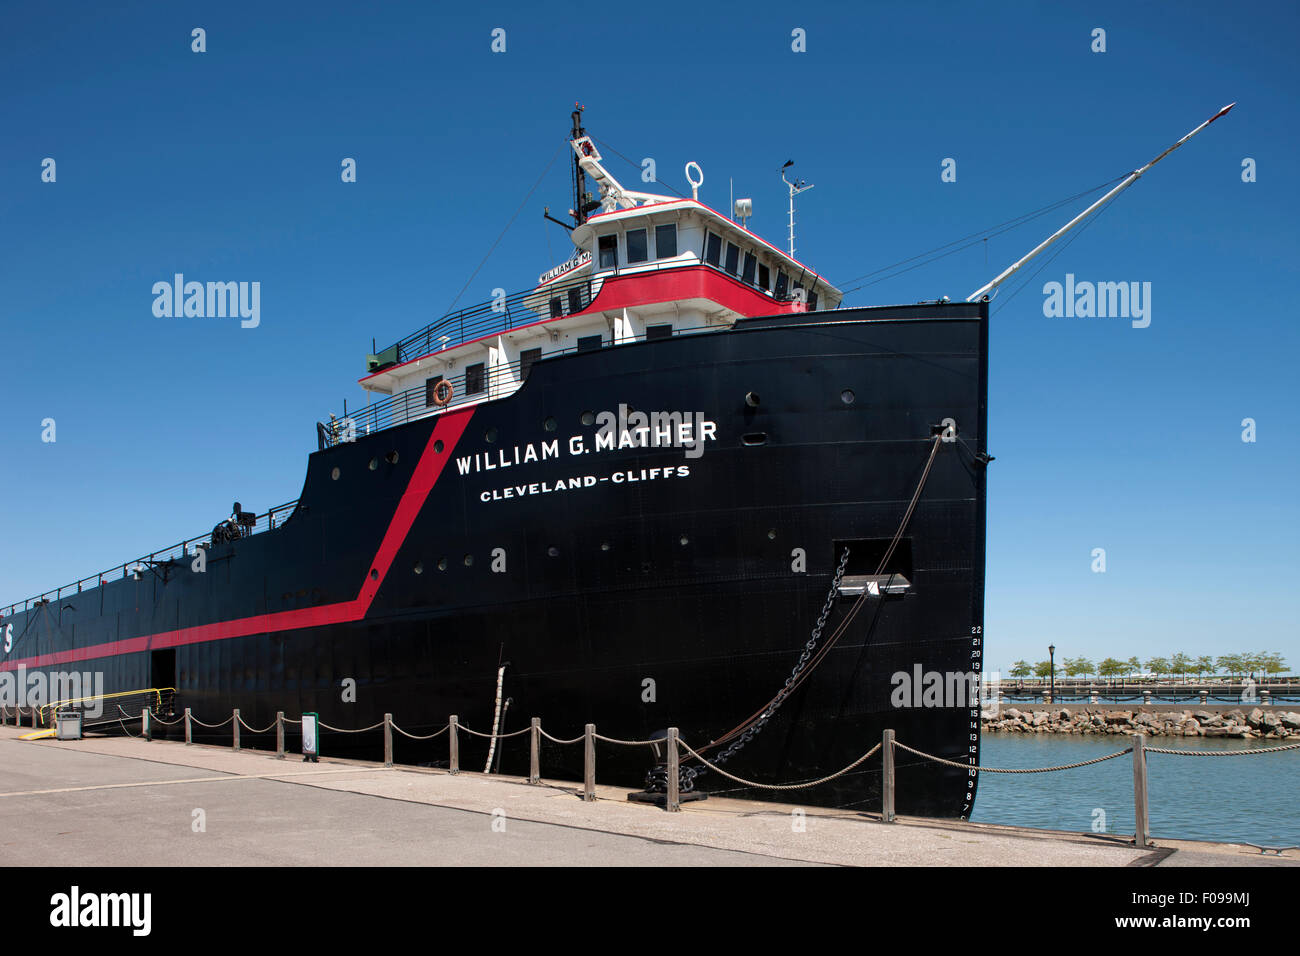 WILLIAM G. MATHER LAKE FREIGHTER MUSEUM DOWNTOWN CLEVELAND OHIO USA Stock Photo